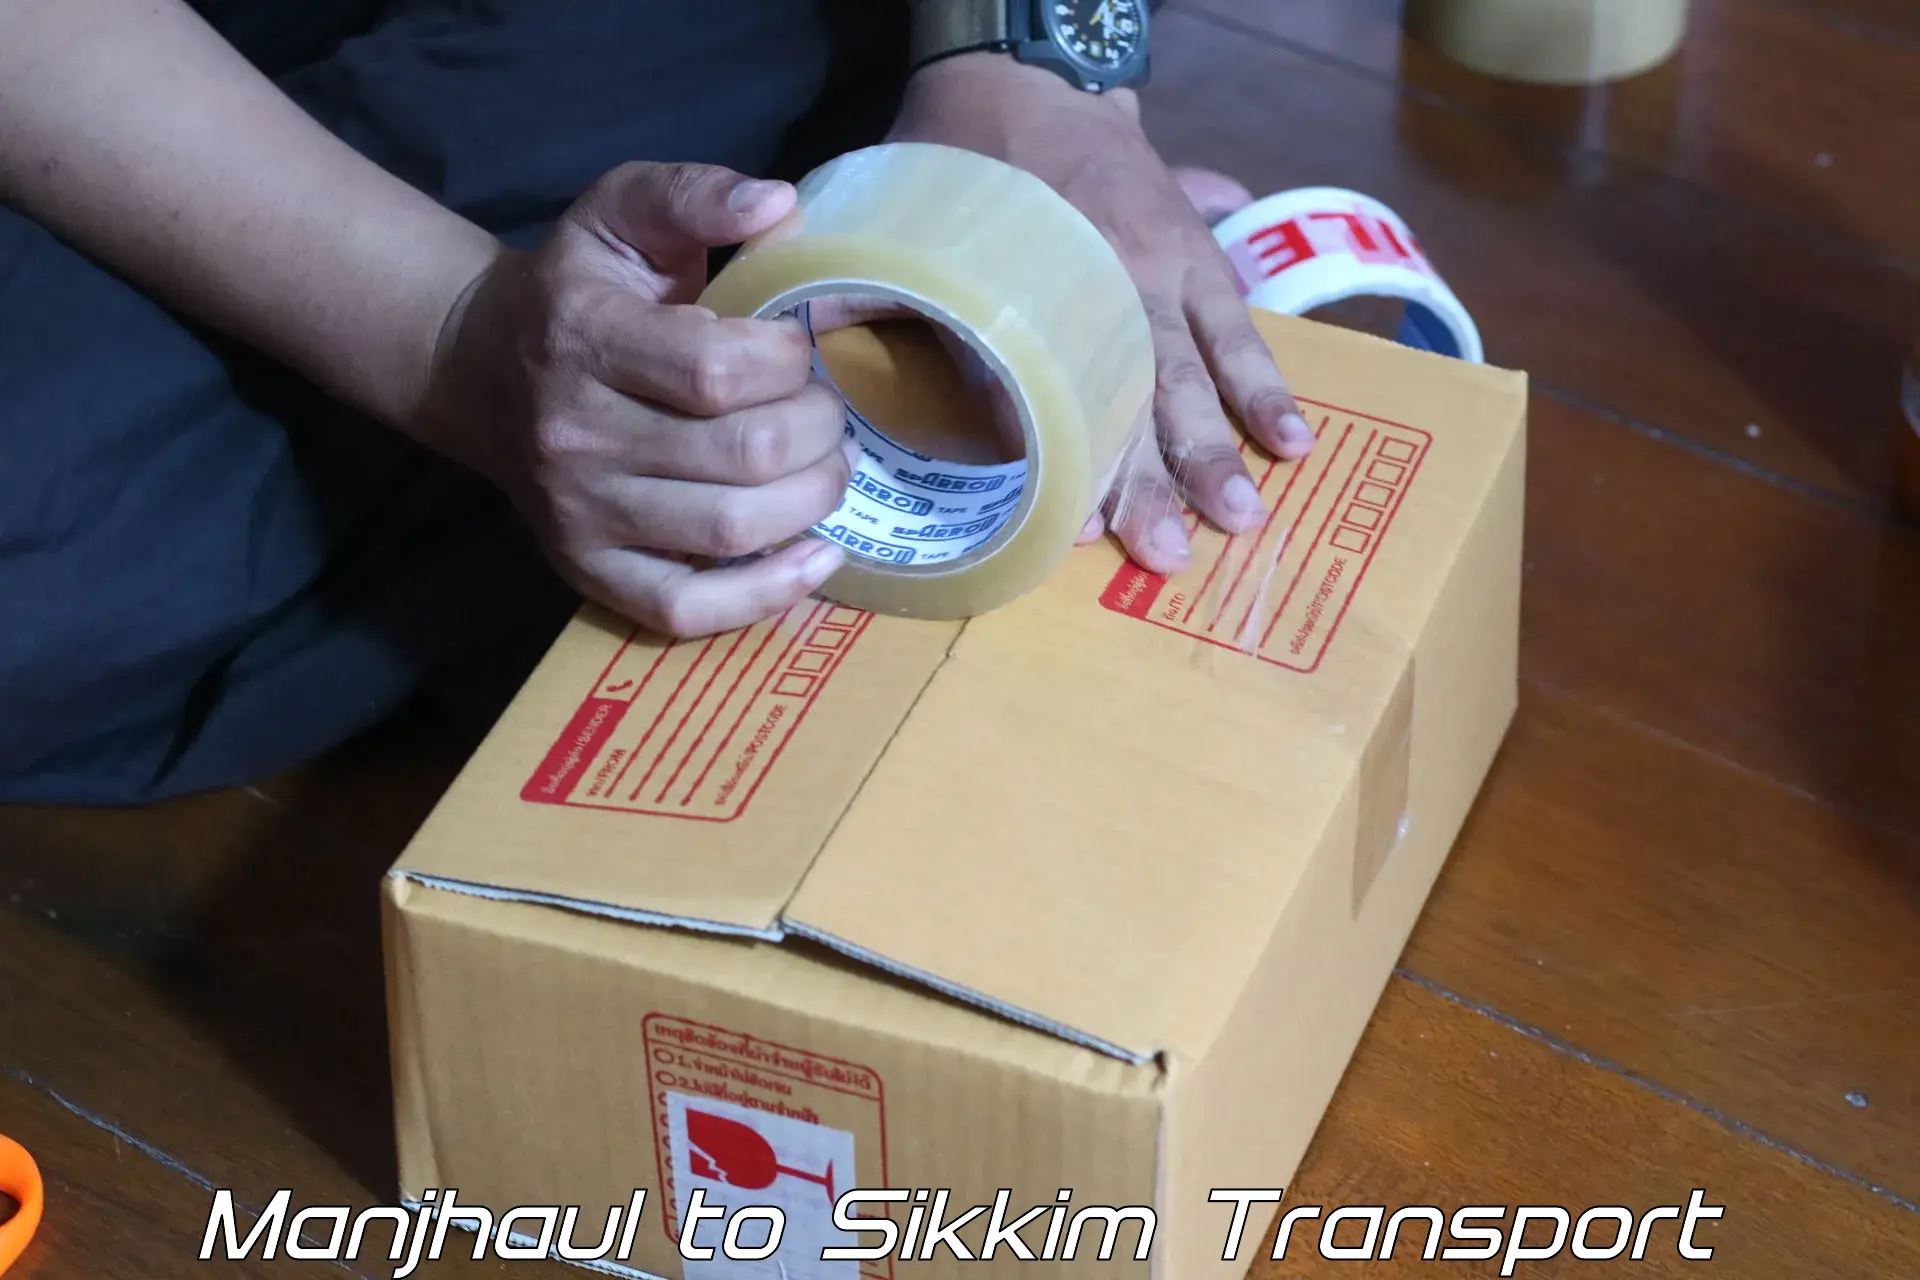 Sending bike to another city Manjhaul to Sikkim